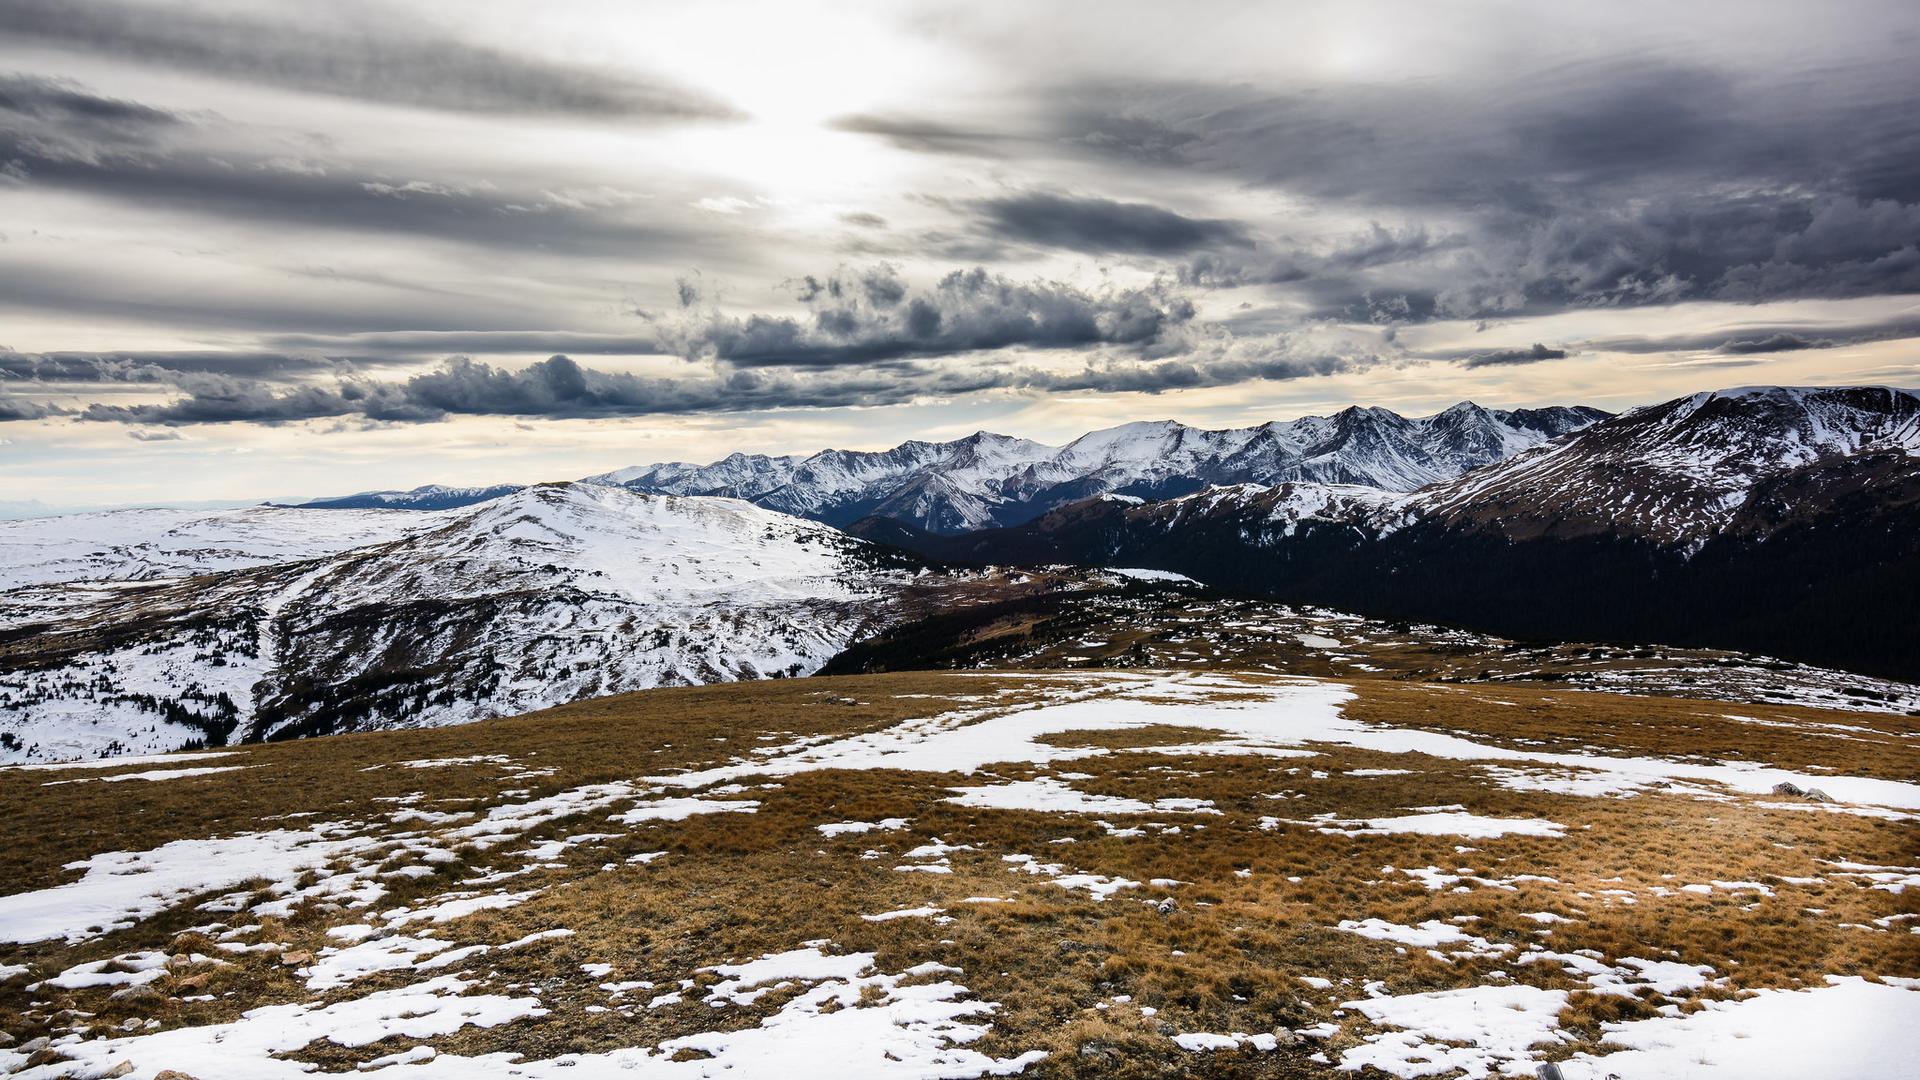 A view of tundra landscape in the Rocky Mountains — 11,000 feet from sea level.